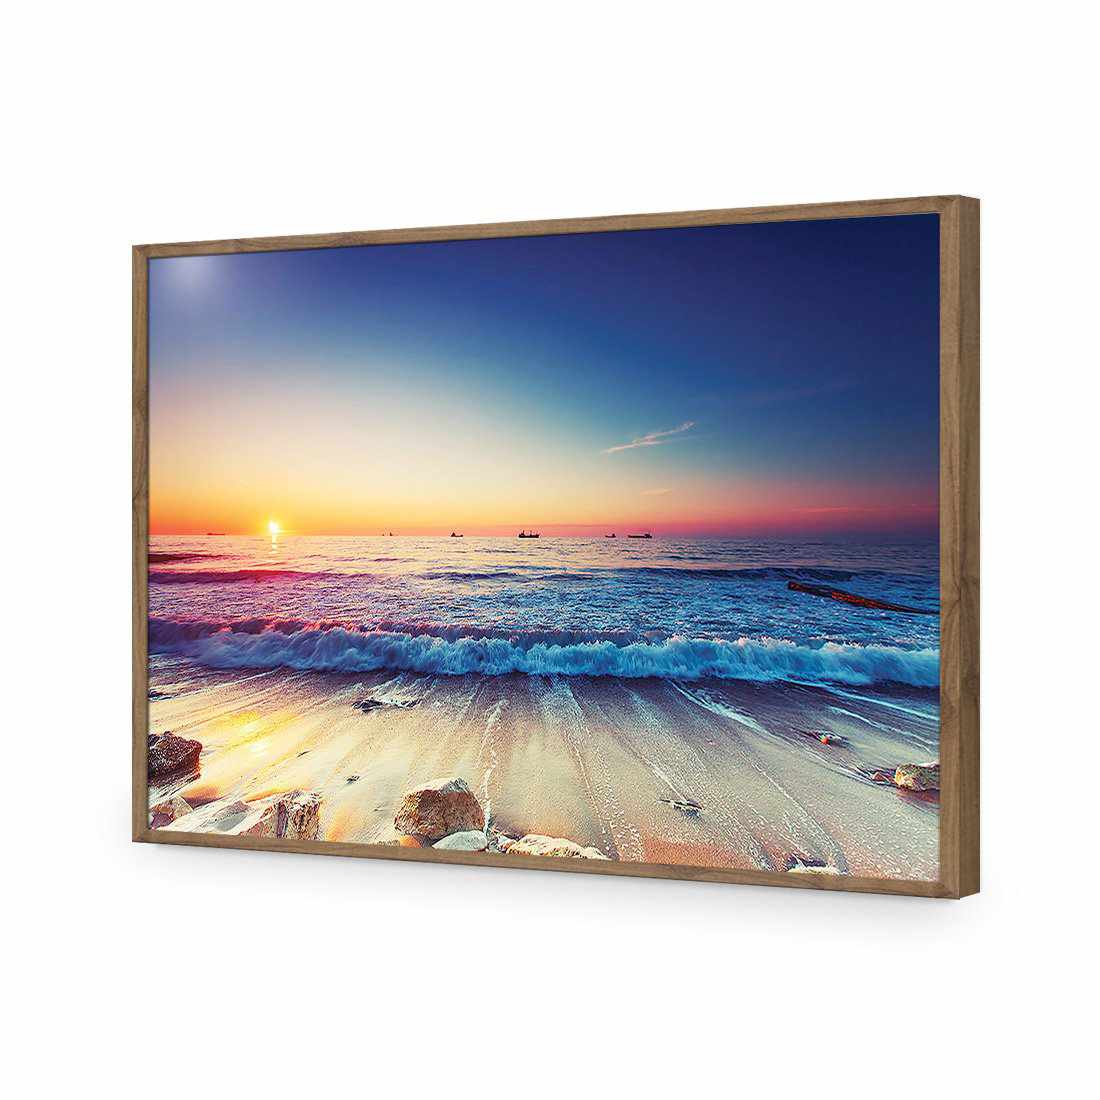 High Tide Sunset-Acrylic-Wall Art Design-Without Border-Acrylic - Natural Frame-45x30cm-Wall Art Designs